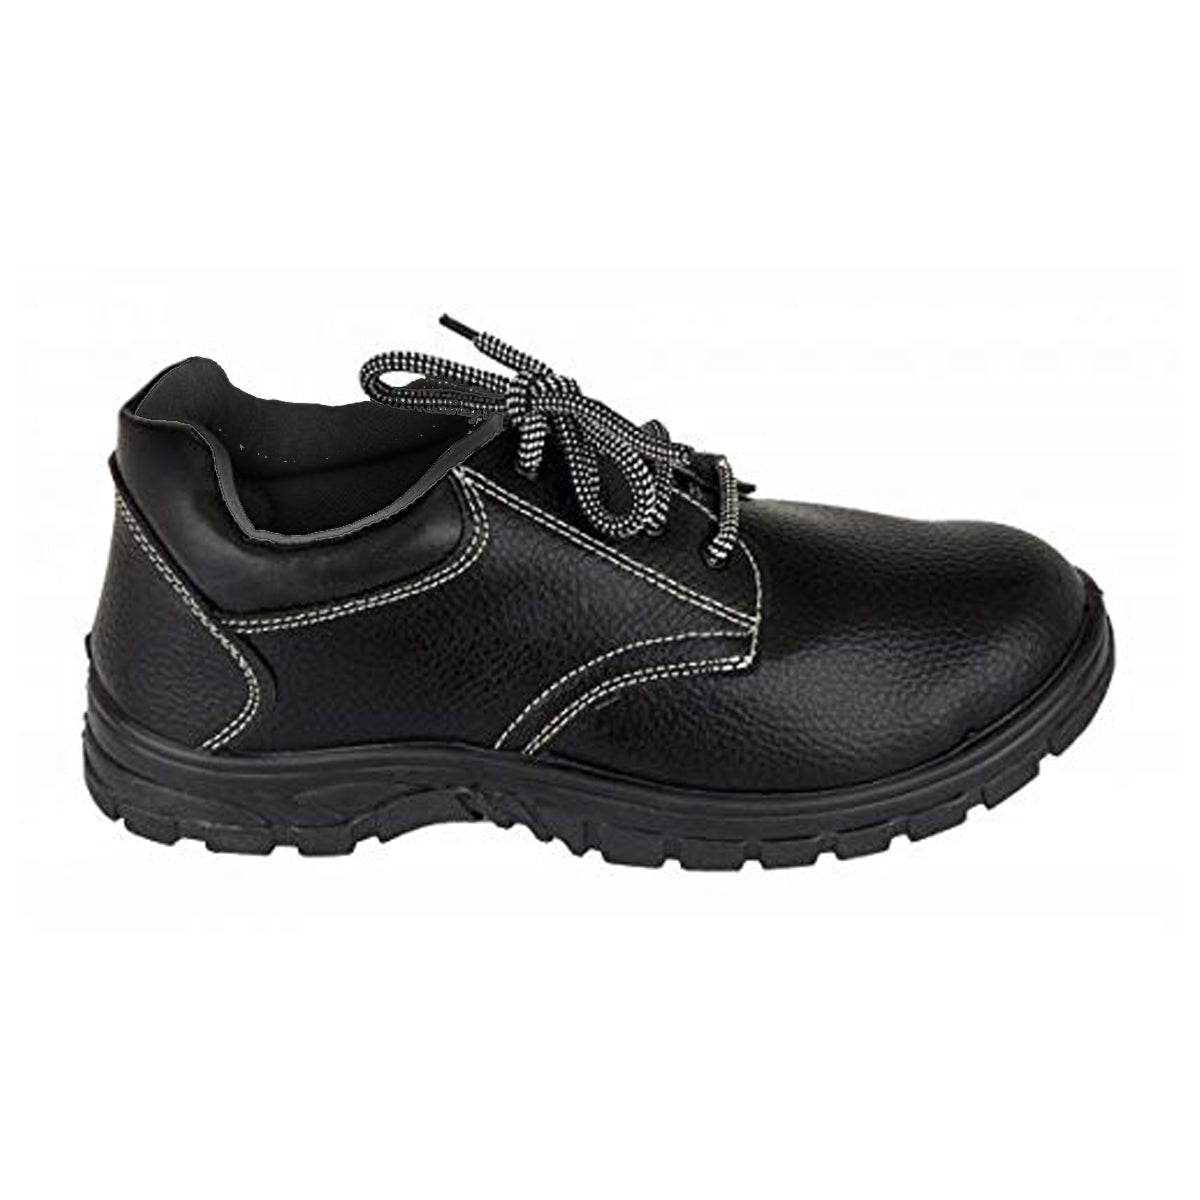 Zara steel toe safety shoes pvc shoes